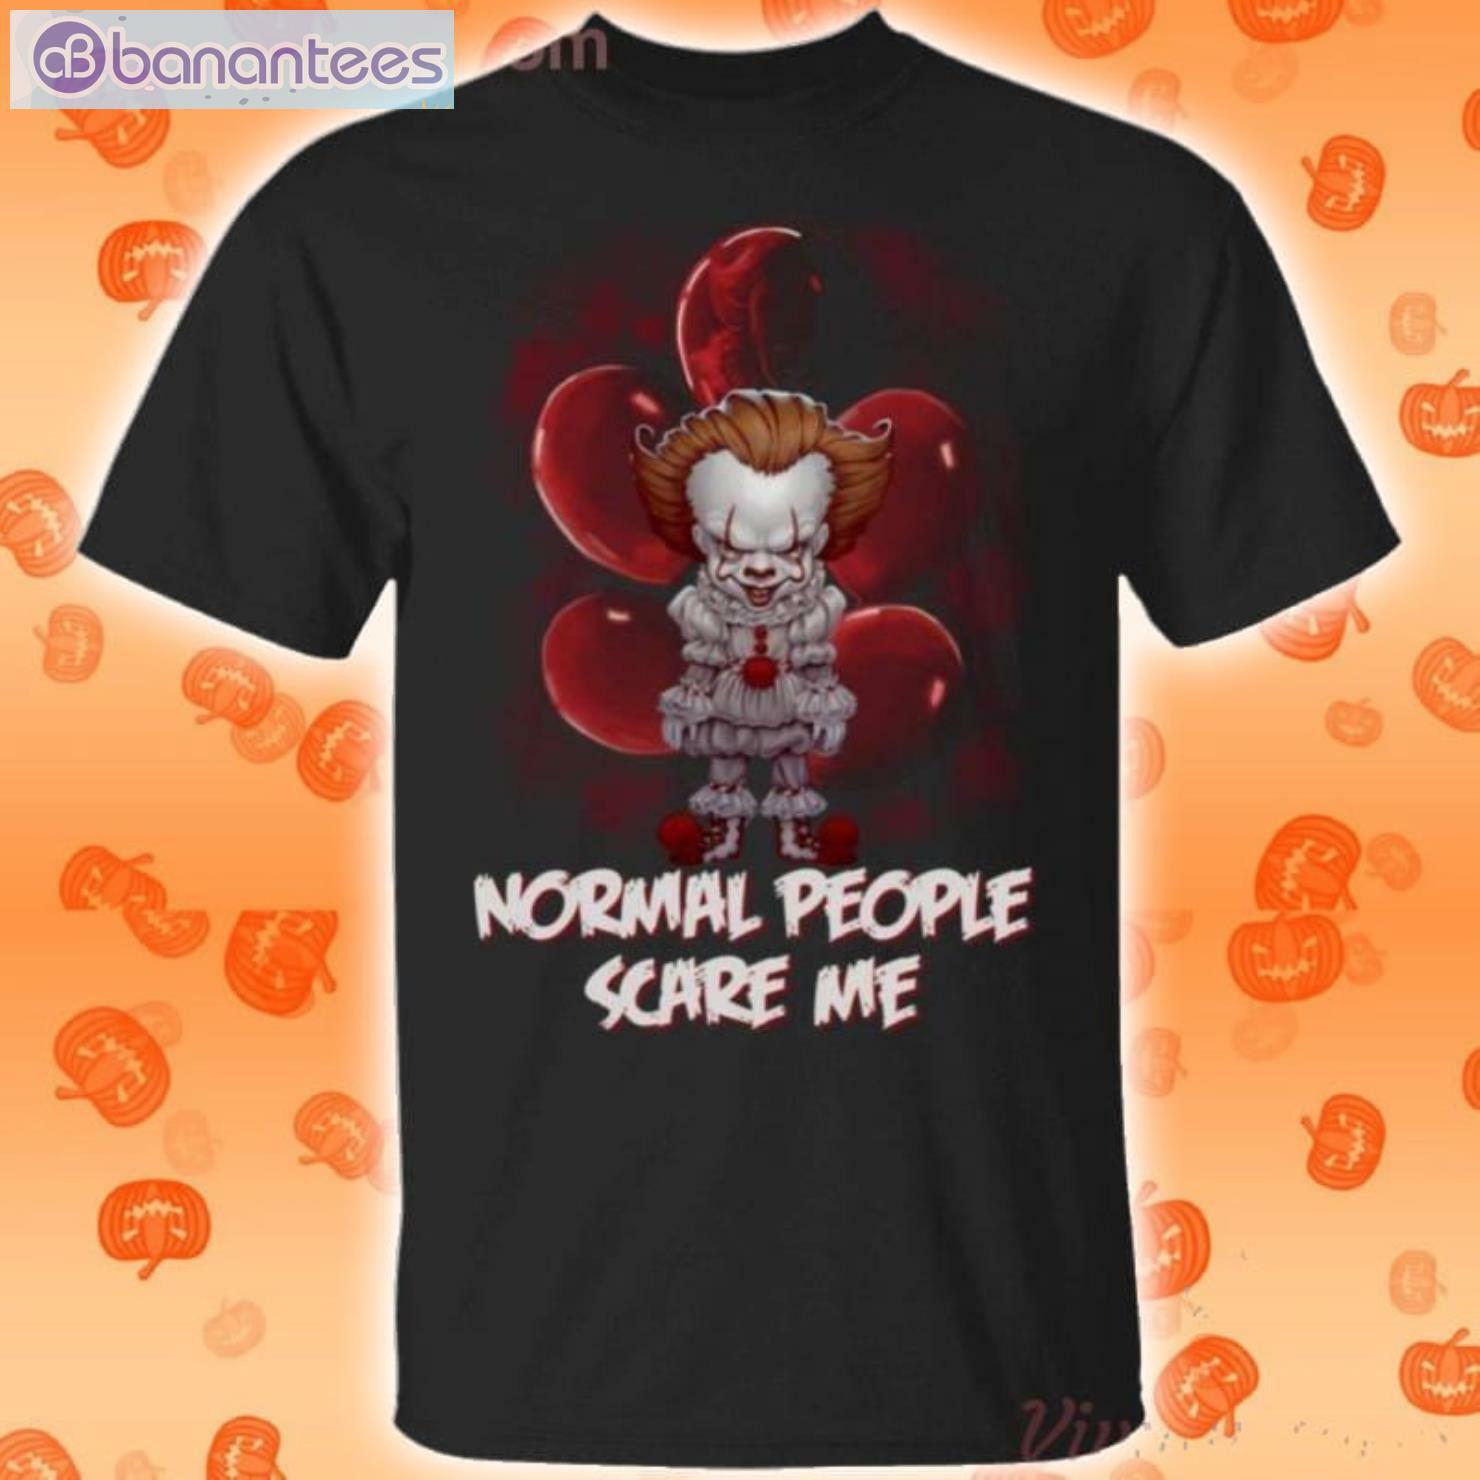 Normal People Scare Me Pennywise It Movie Halloween T-Shirt Product Photo 1 Product photo 1